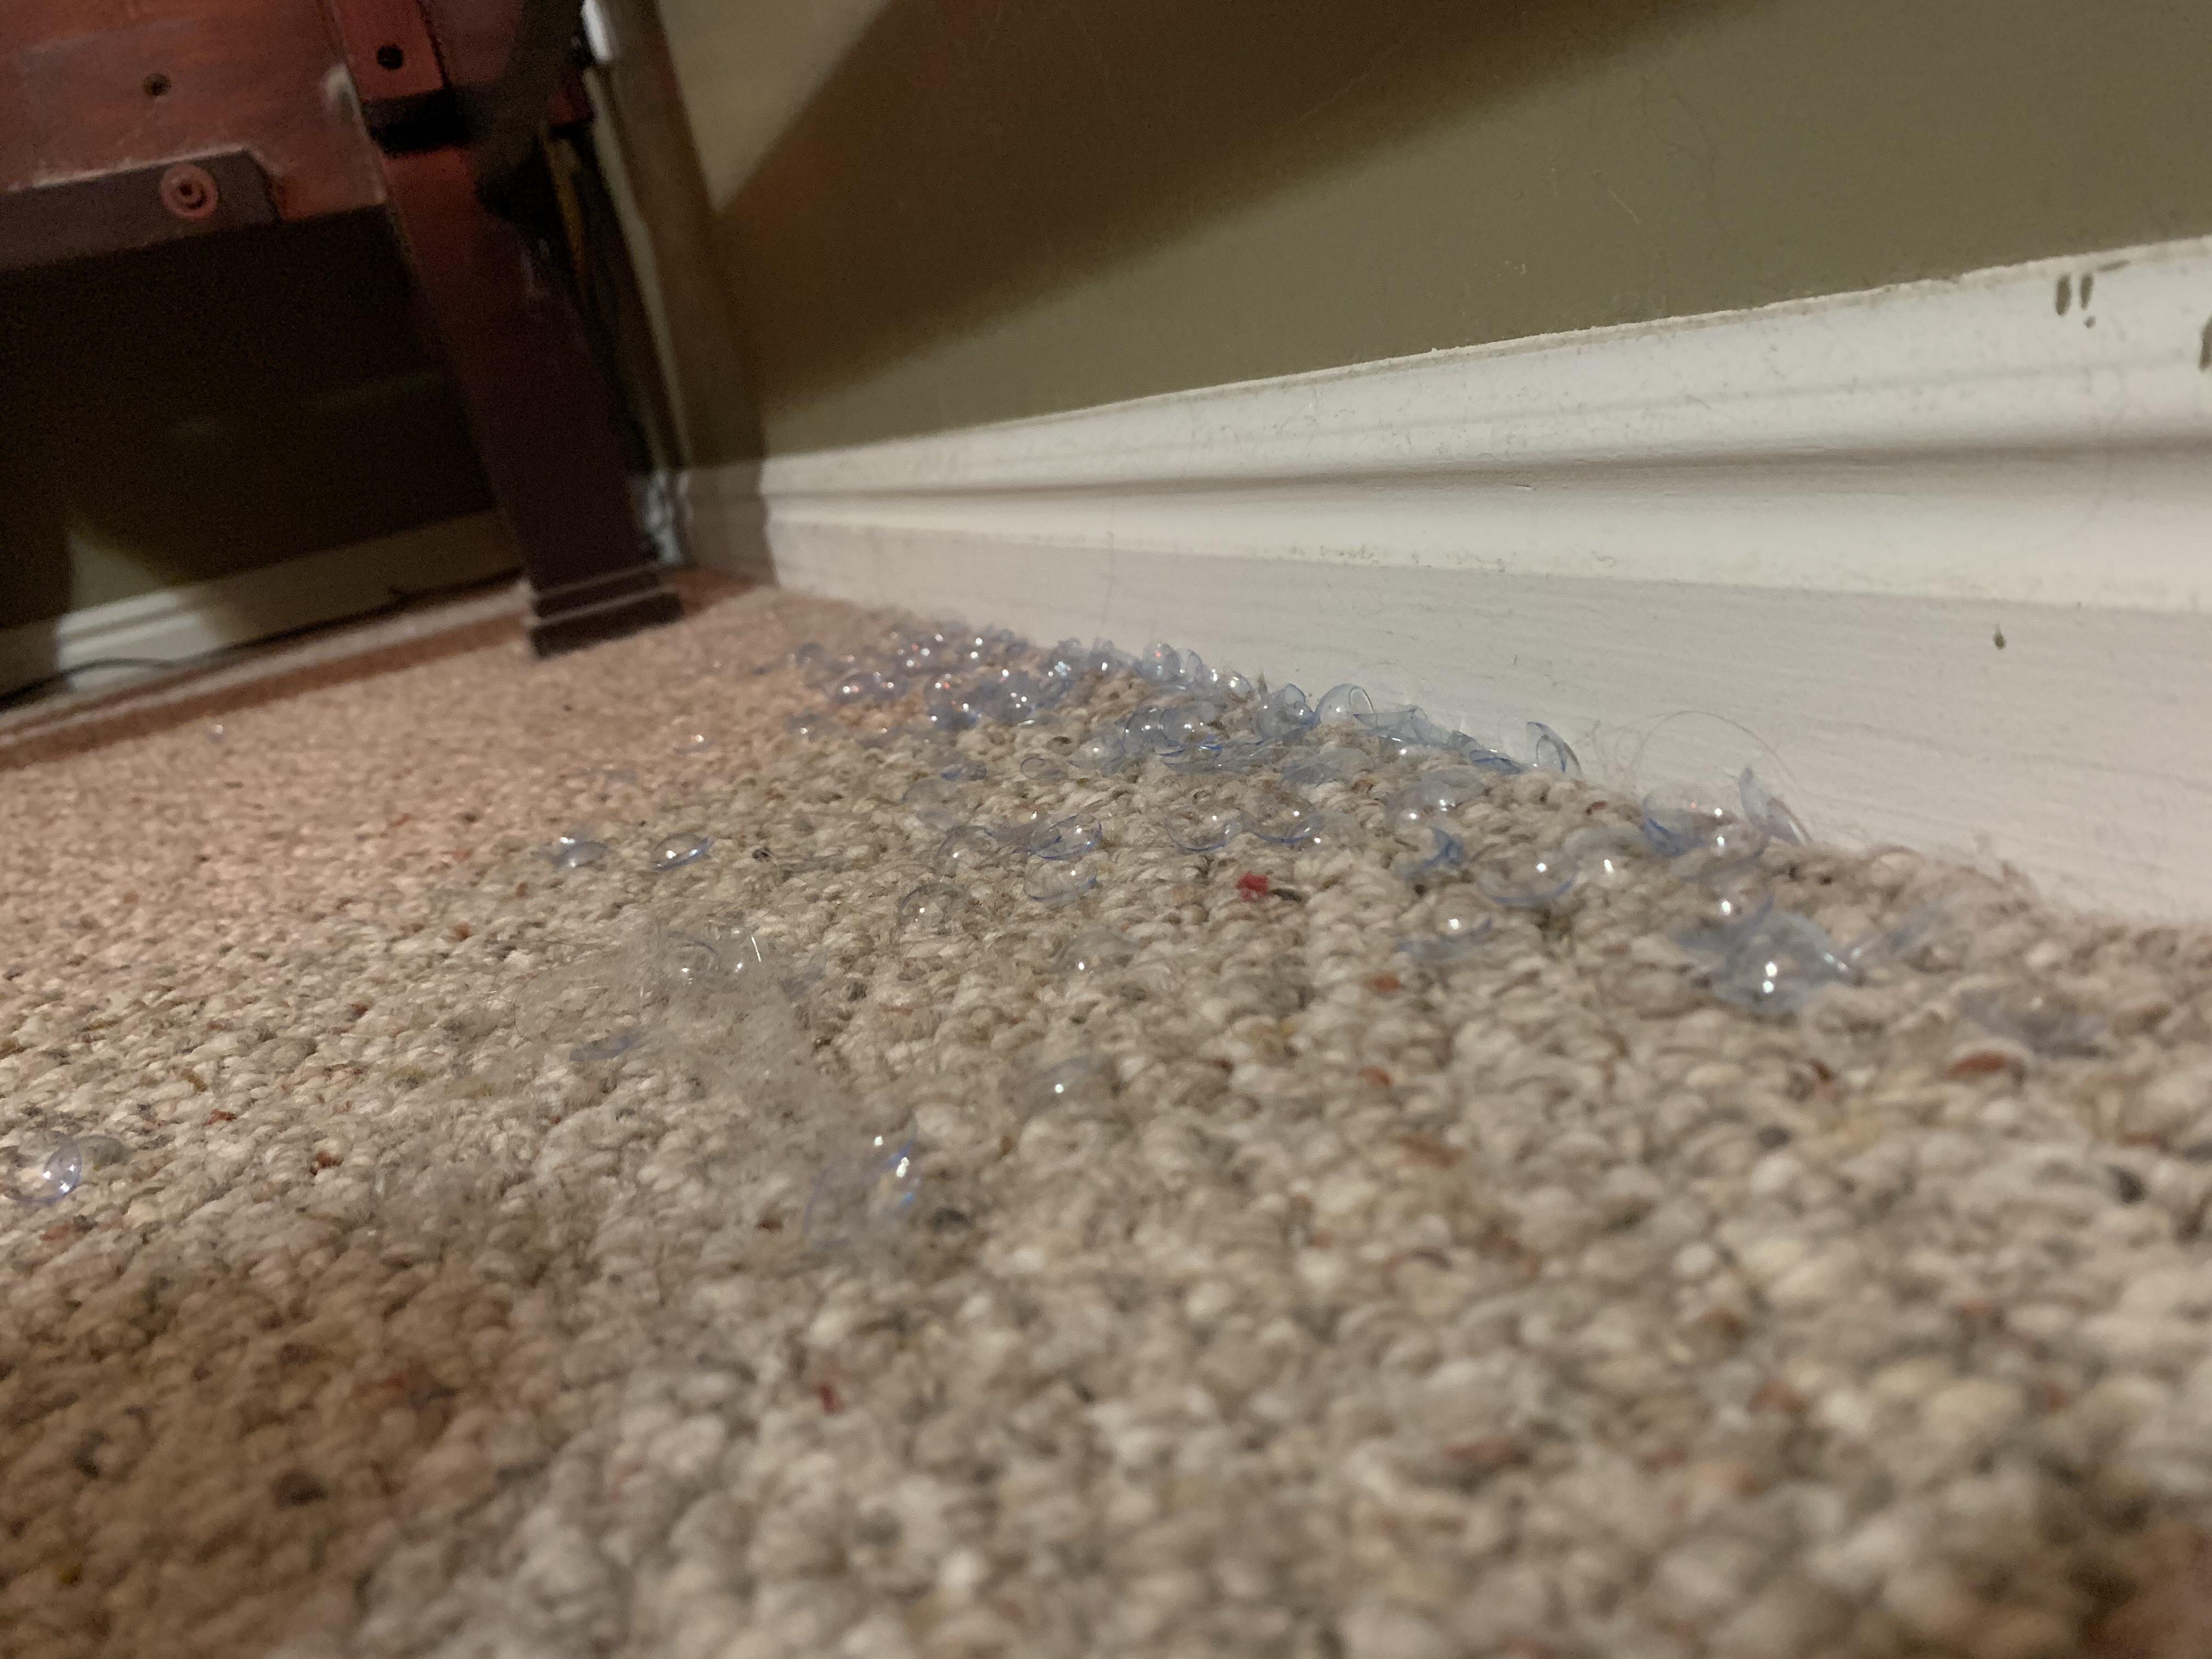 dumb secrets couples keep - I found your pile of used contact lenses under the dresser next to the bed. u/Phantapant